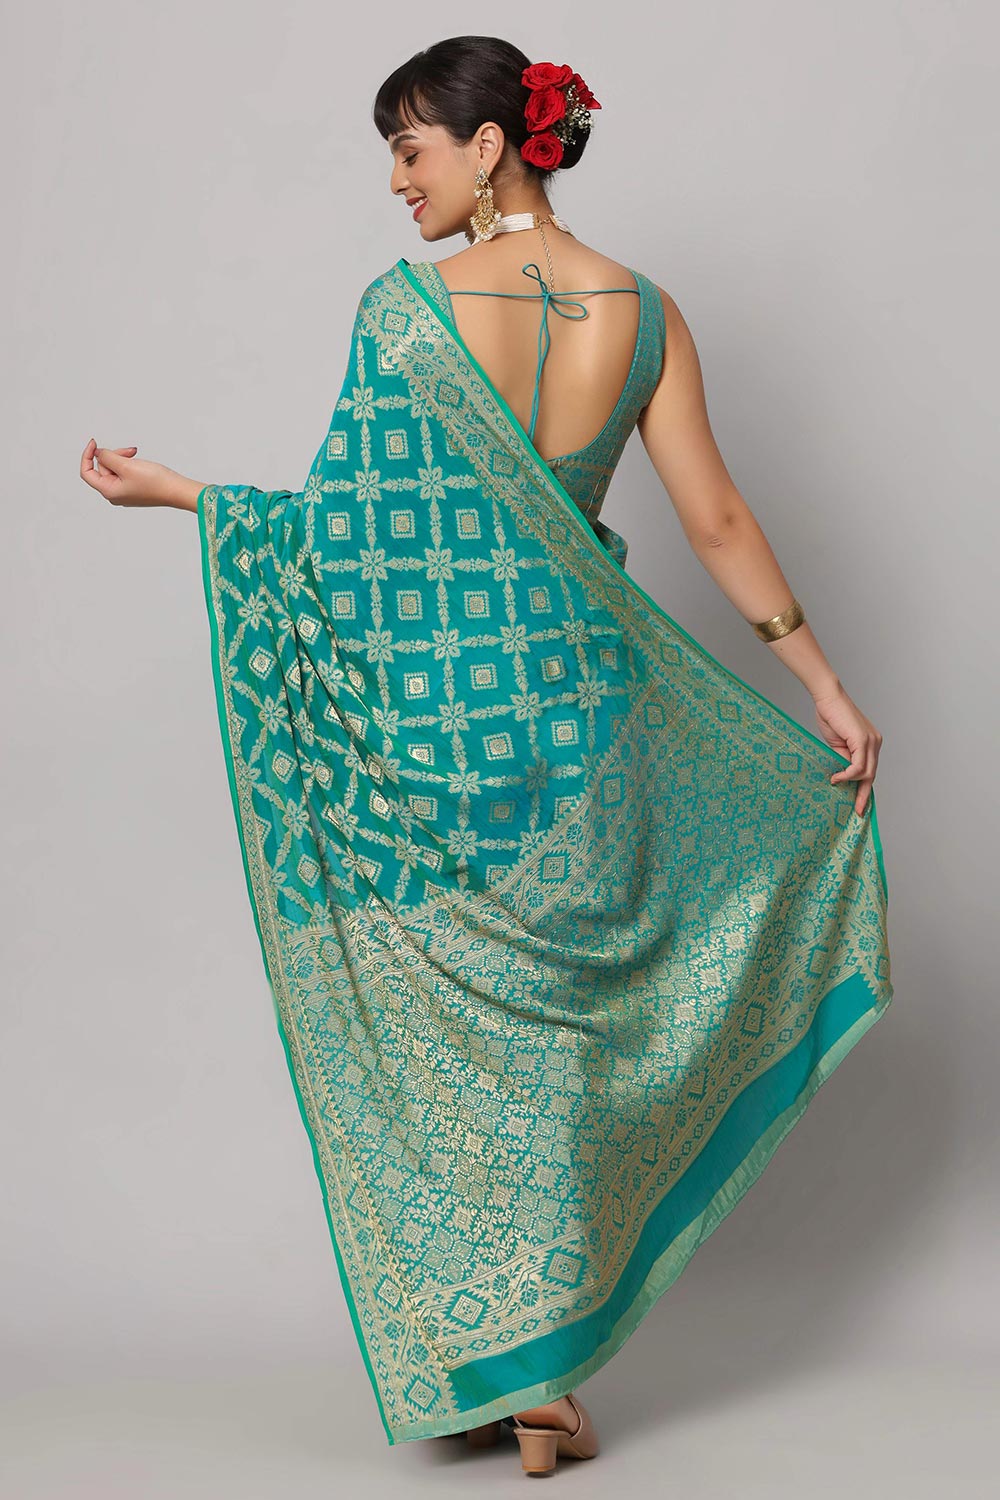 Shop Sana Turquoise Gold Embroidered Georgette One Minute Saree at best offer at our  Store - One Minute Saree